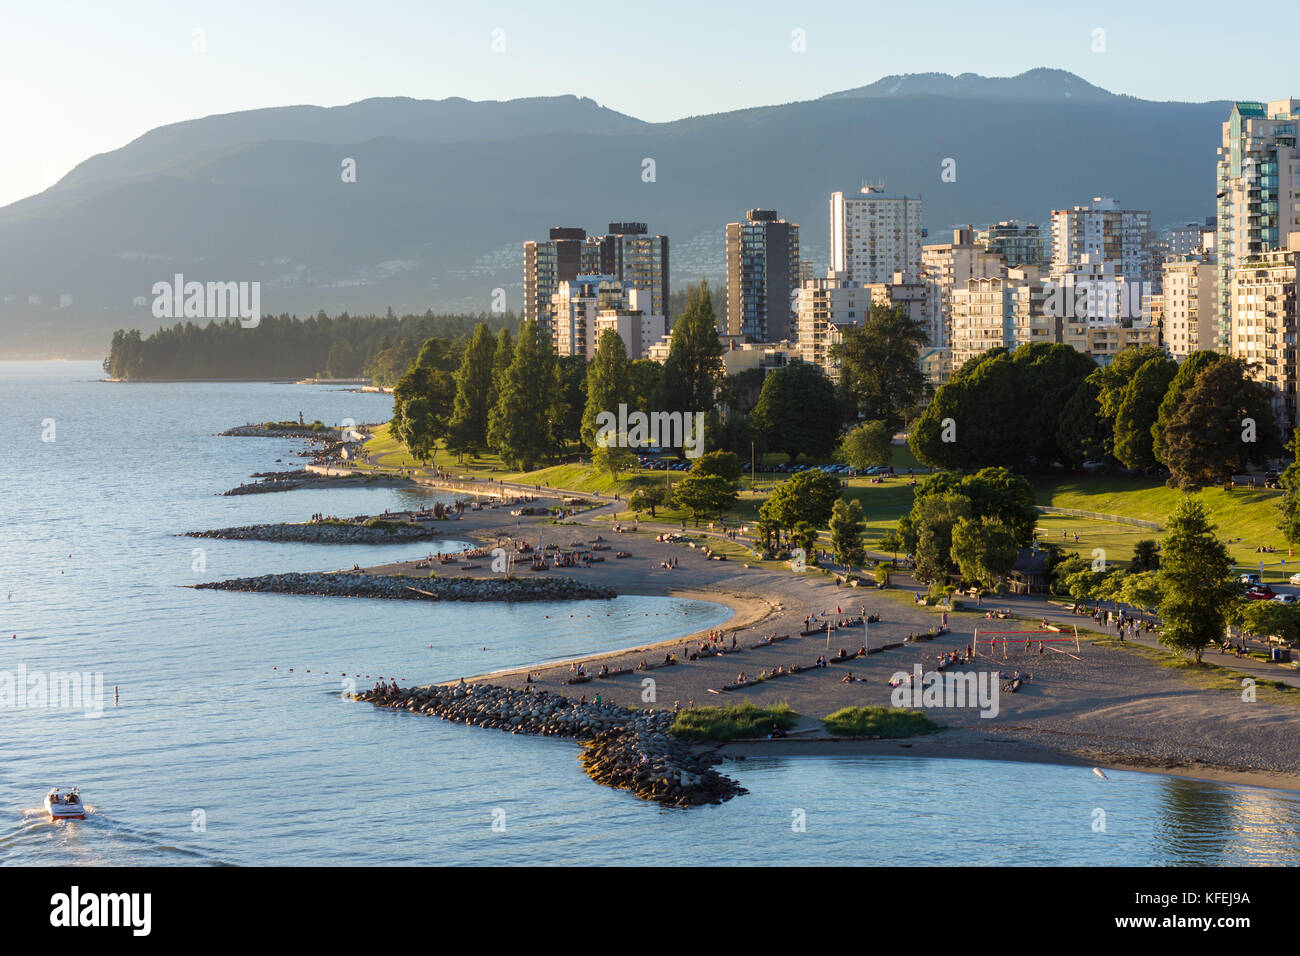 Vancouver, Canada - June 23, 2017: The English bay and Vancouver downtown as seen from the Burrard bridge on a sunny day Stock Photo